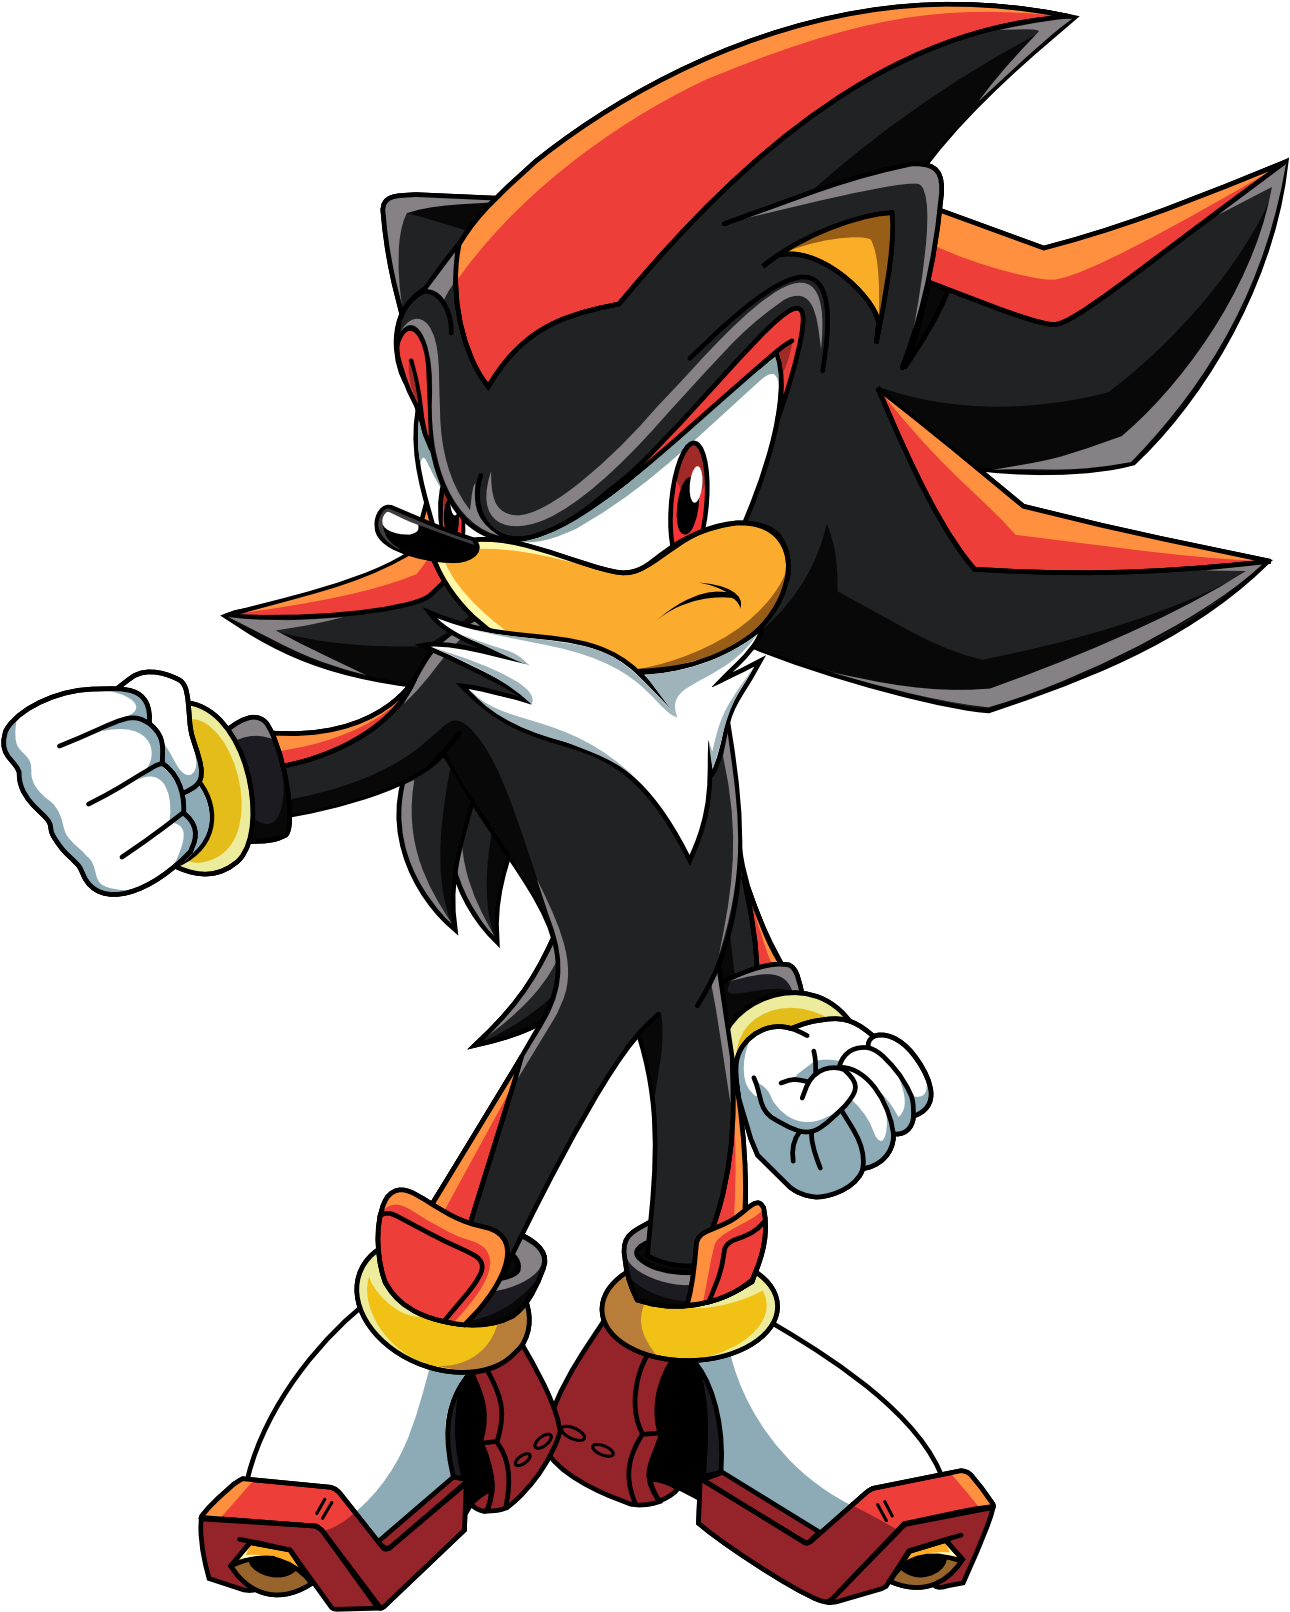 Johsouza Images Shadow The Hedgehog Sonic X Hd Wallpaper Imagenes De Shadow De Sonic X 2904315 Hd Wallpaper Backgrounds Download